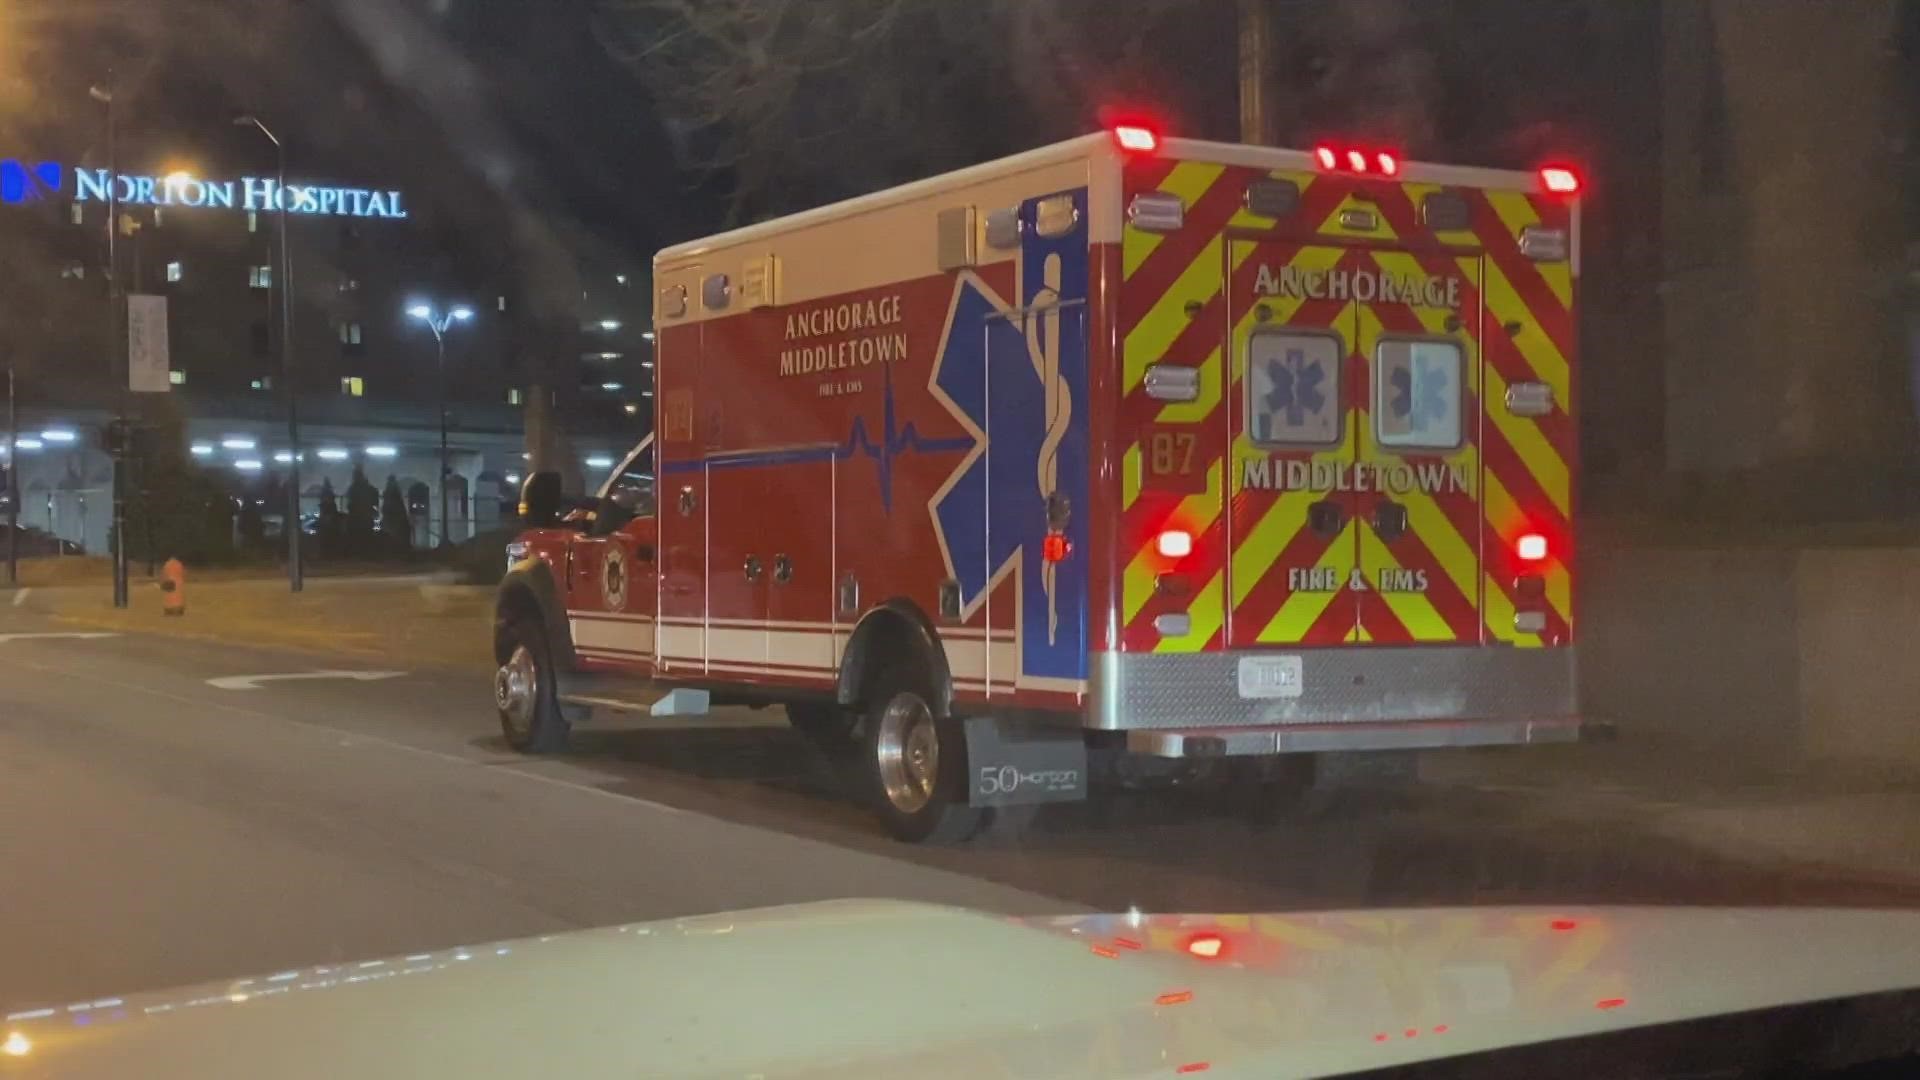 The city admits it's short-staffed, so it needs help from paramedics and EMT's from the suburbs of Jefferson County. Just how much is that taxing resources?